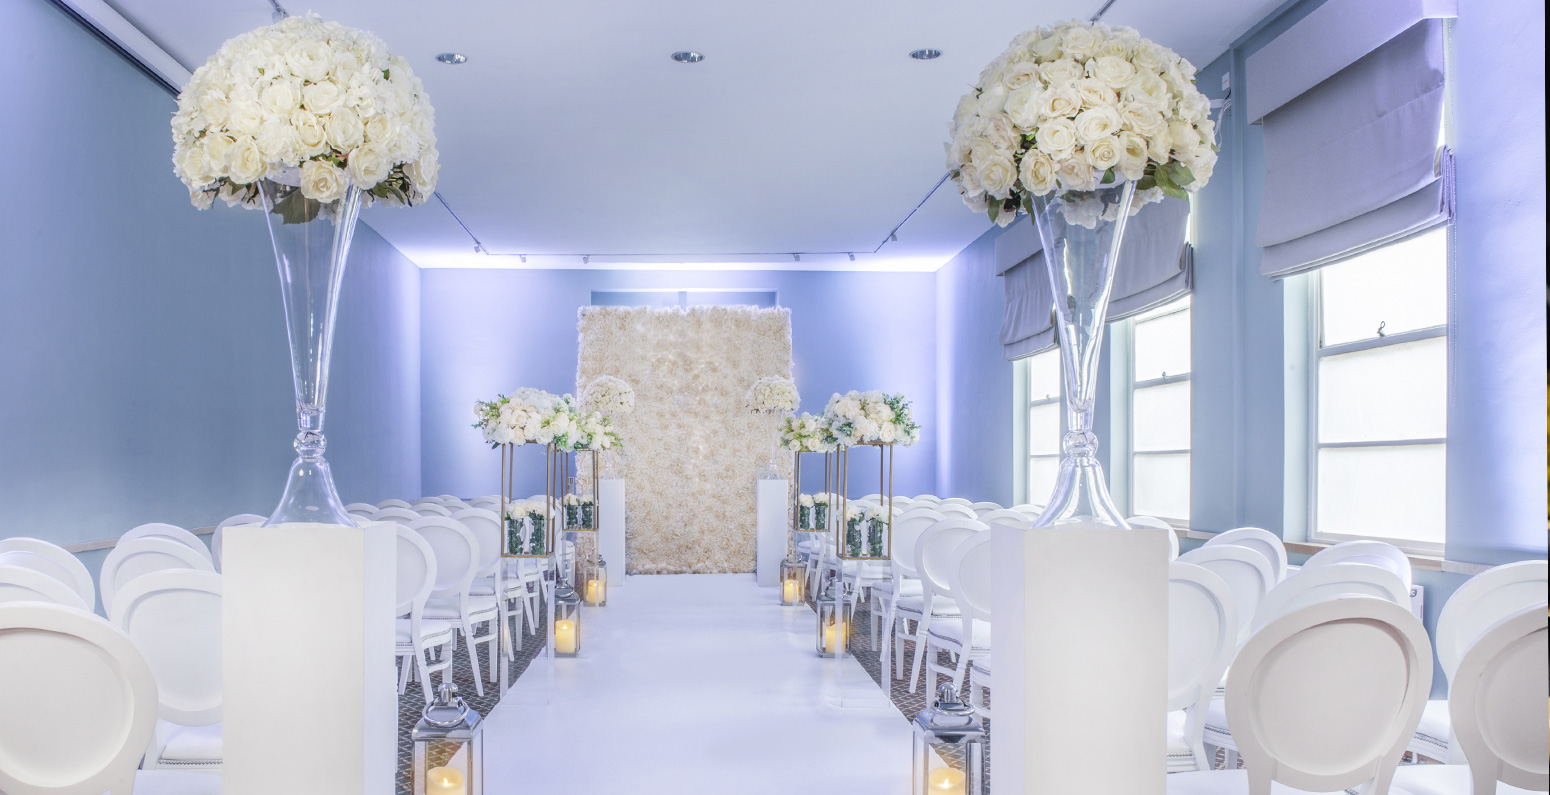 The wedding venue in blue and white.